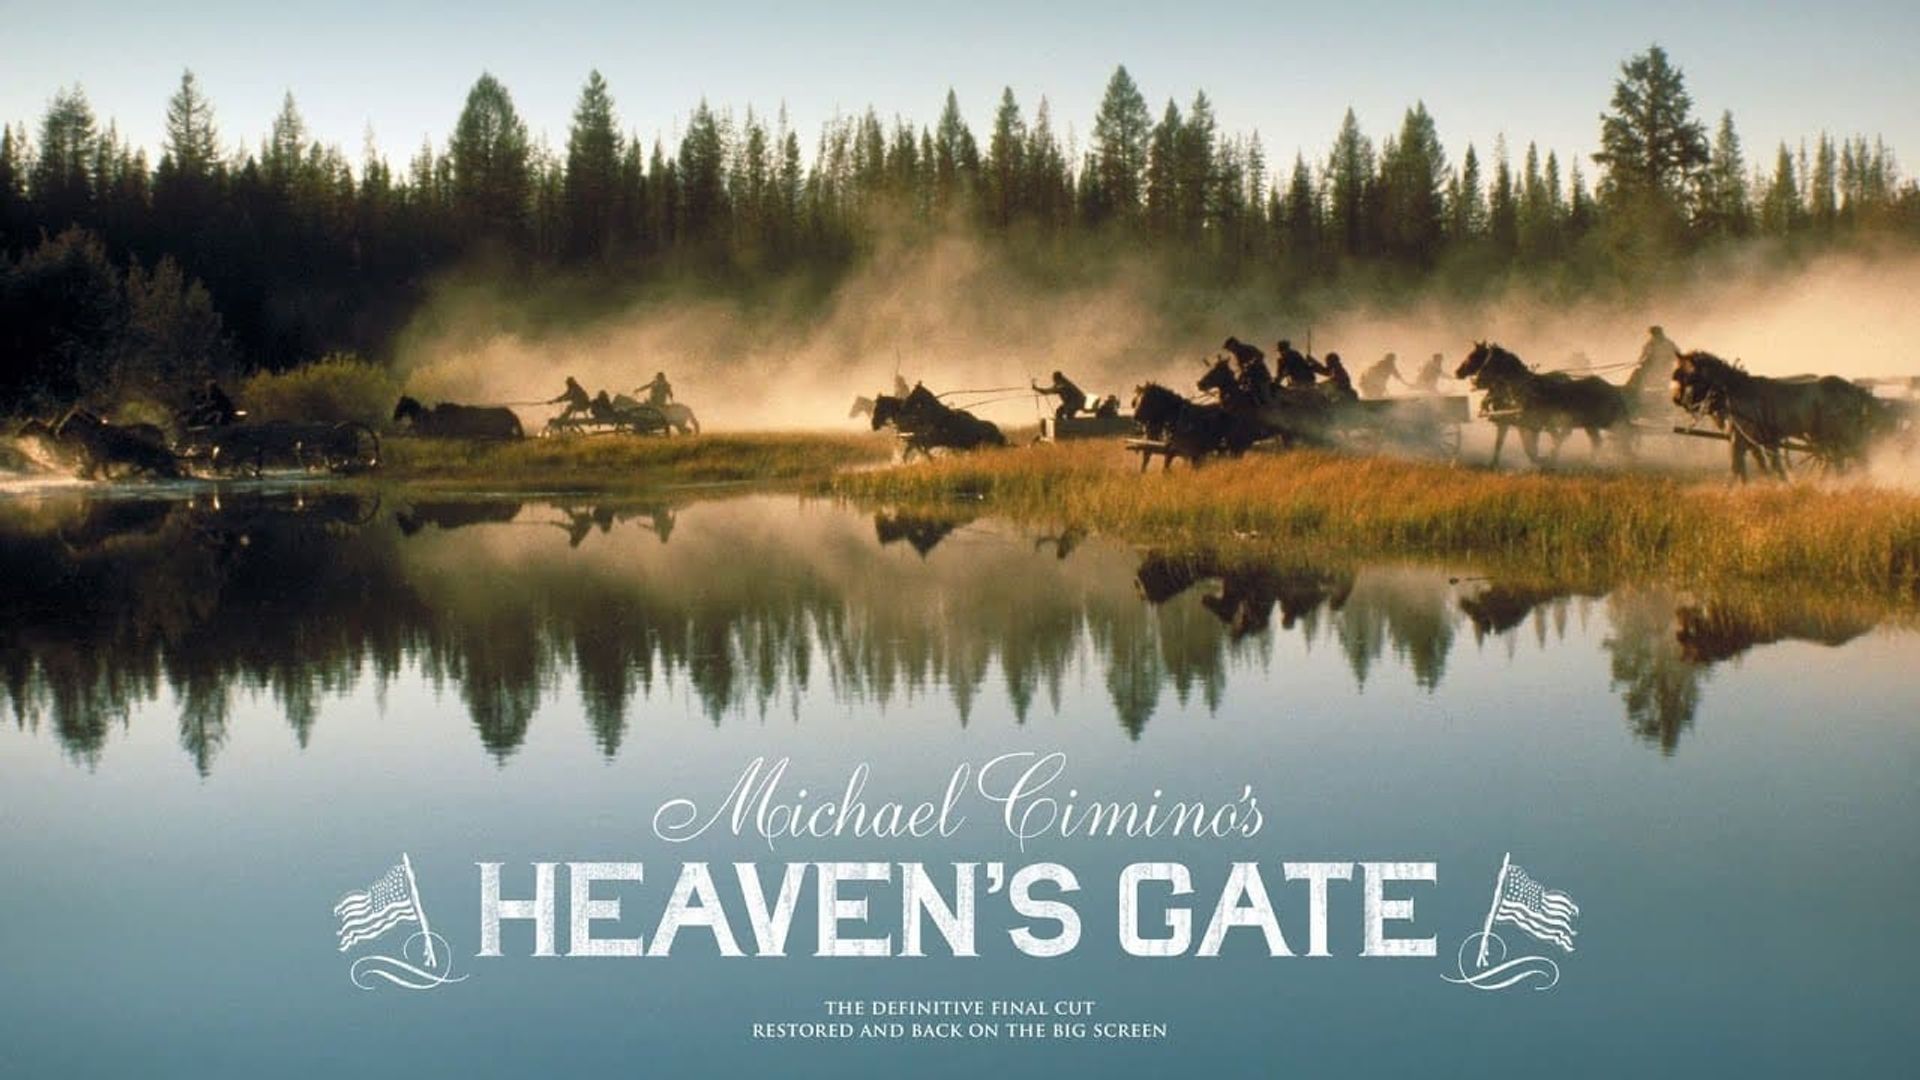 Final Cut: The Making and Unmaking of Heaven's Gate background